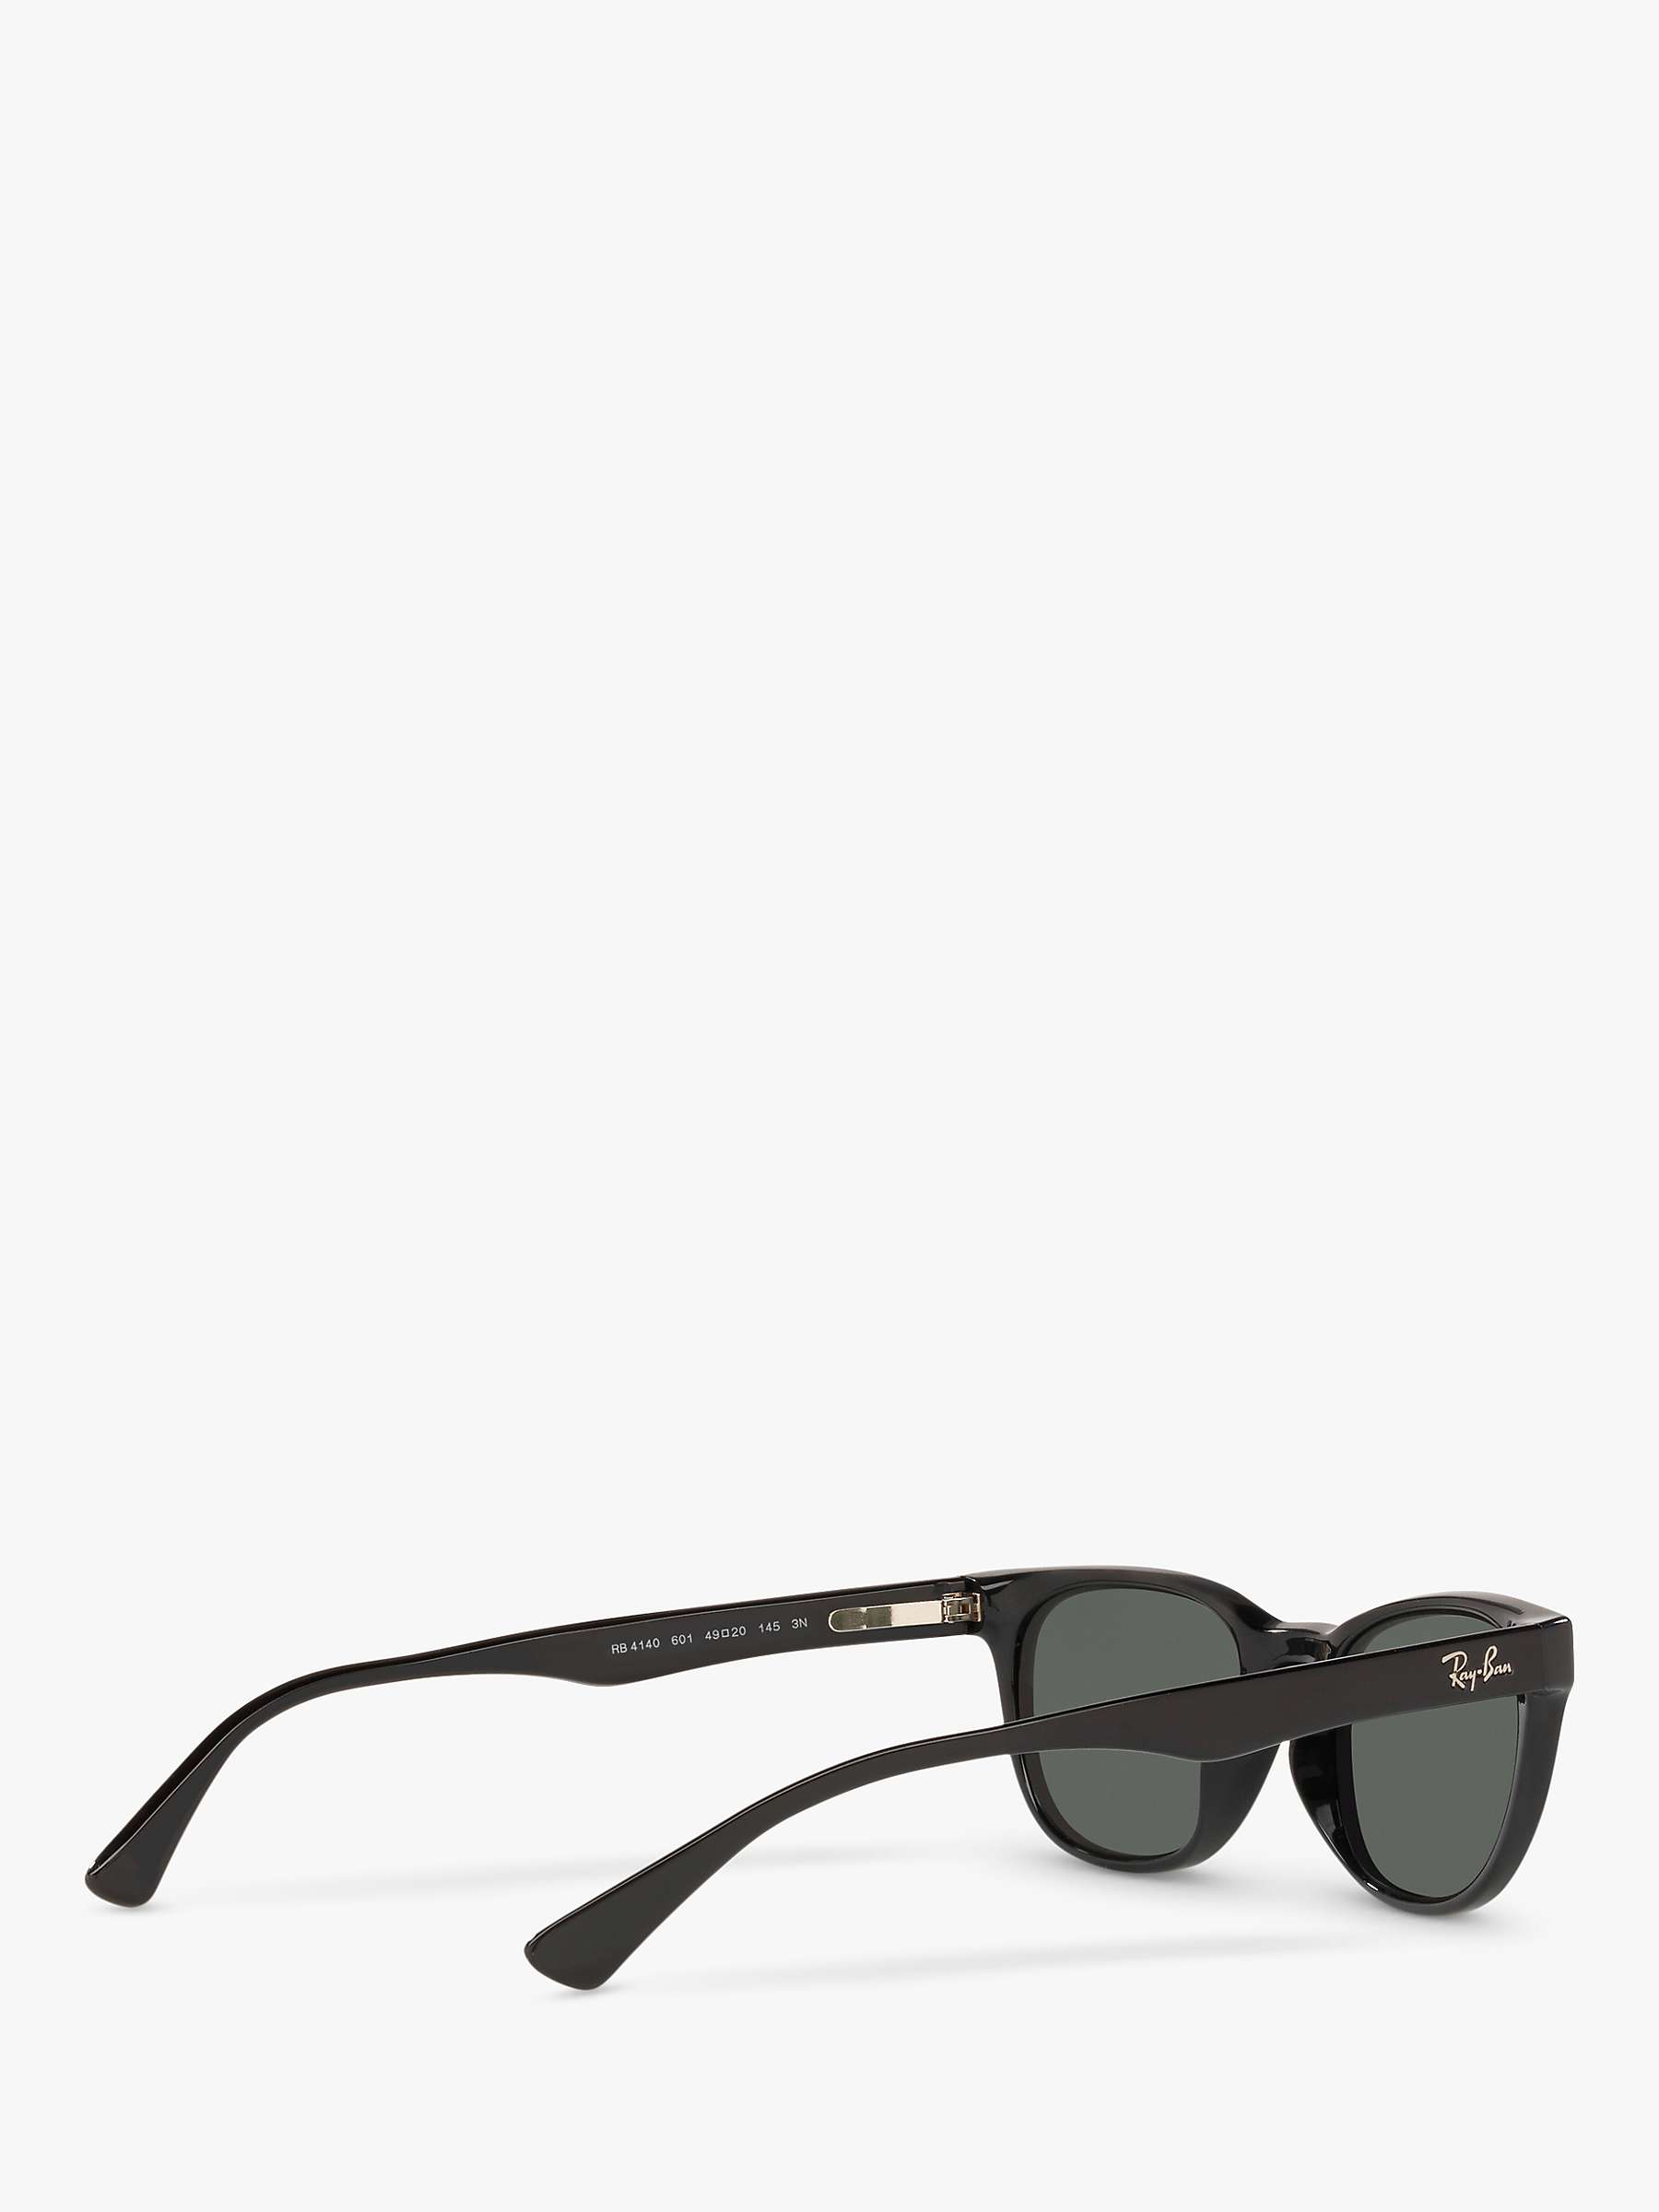 Buy Ray-Ban RB4140 Women's Square Sunglasses, Black/Grey Online at johnlewis.com